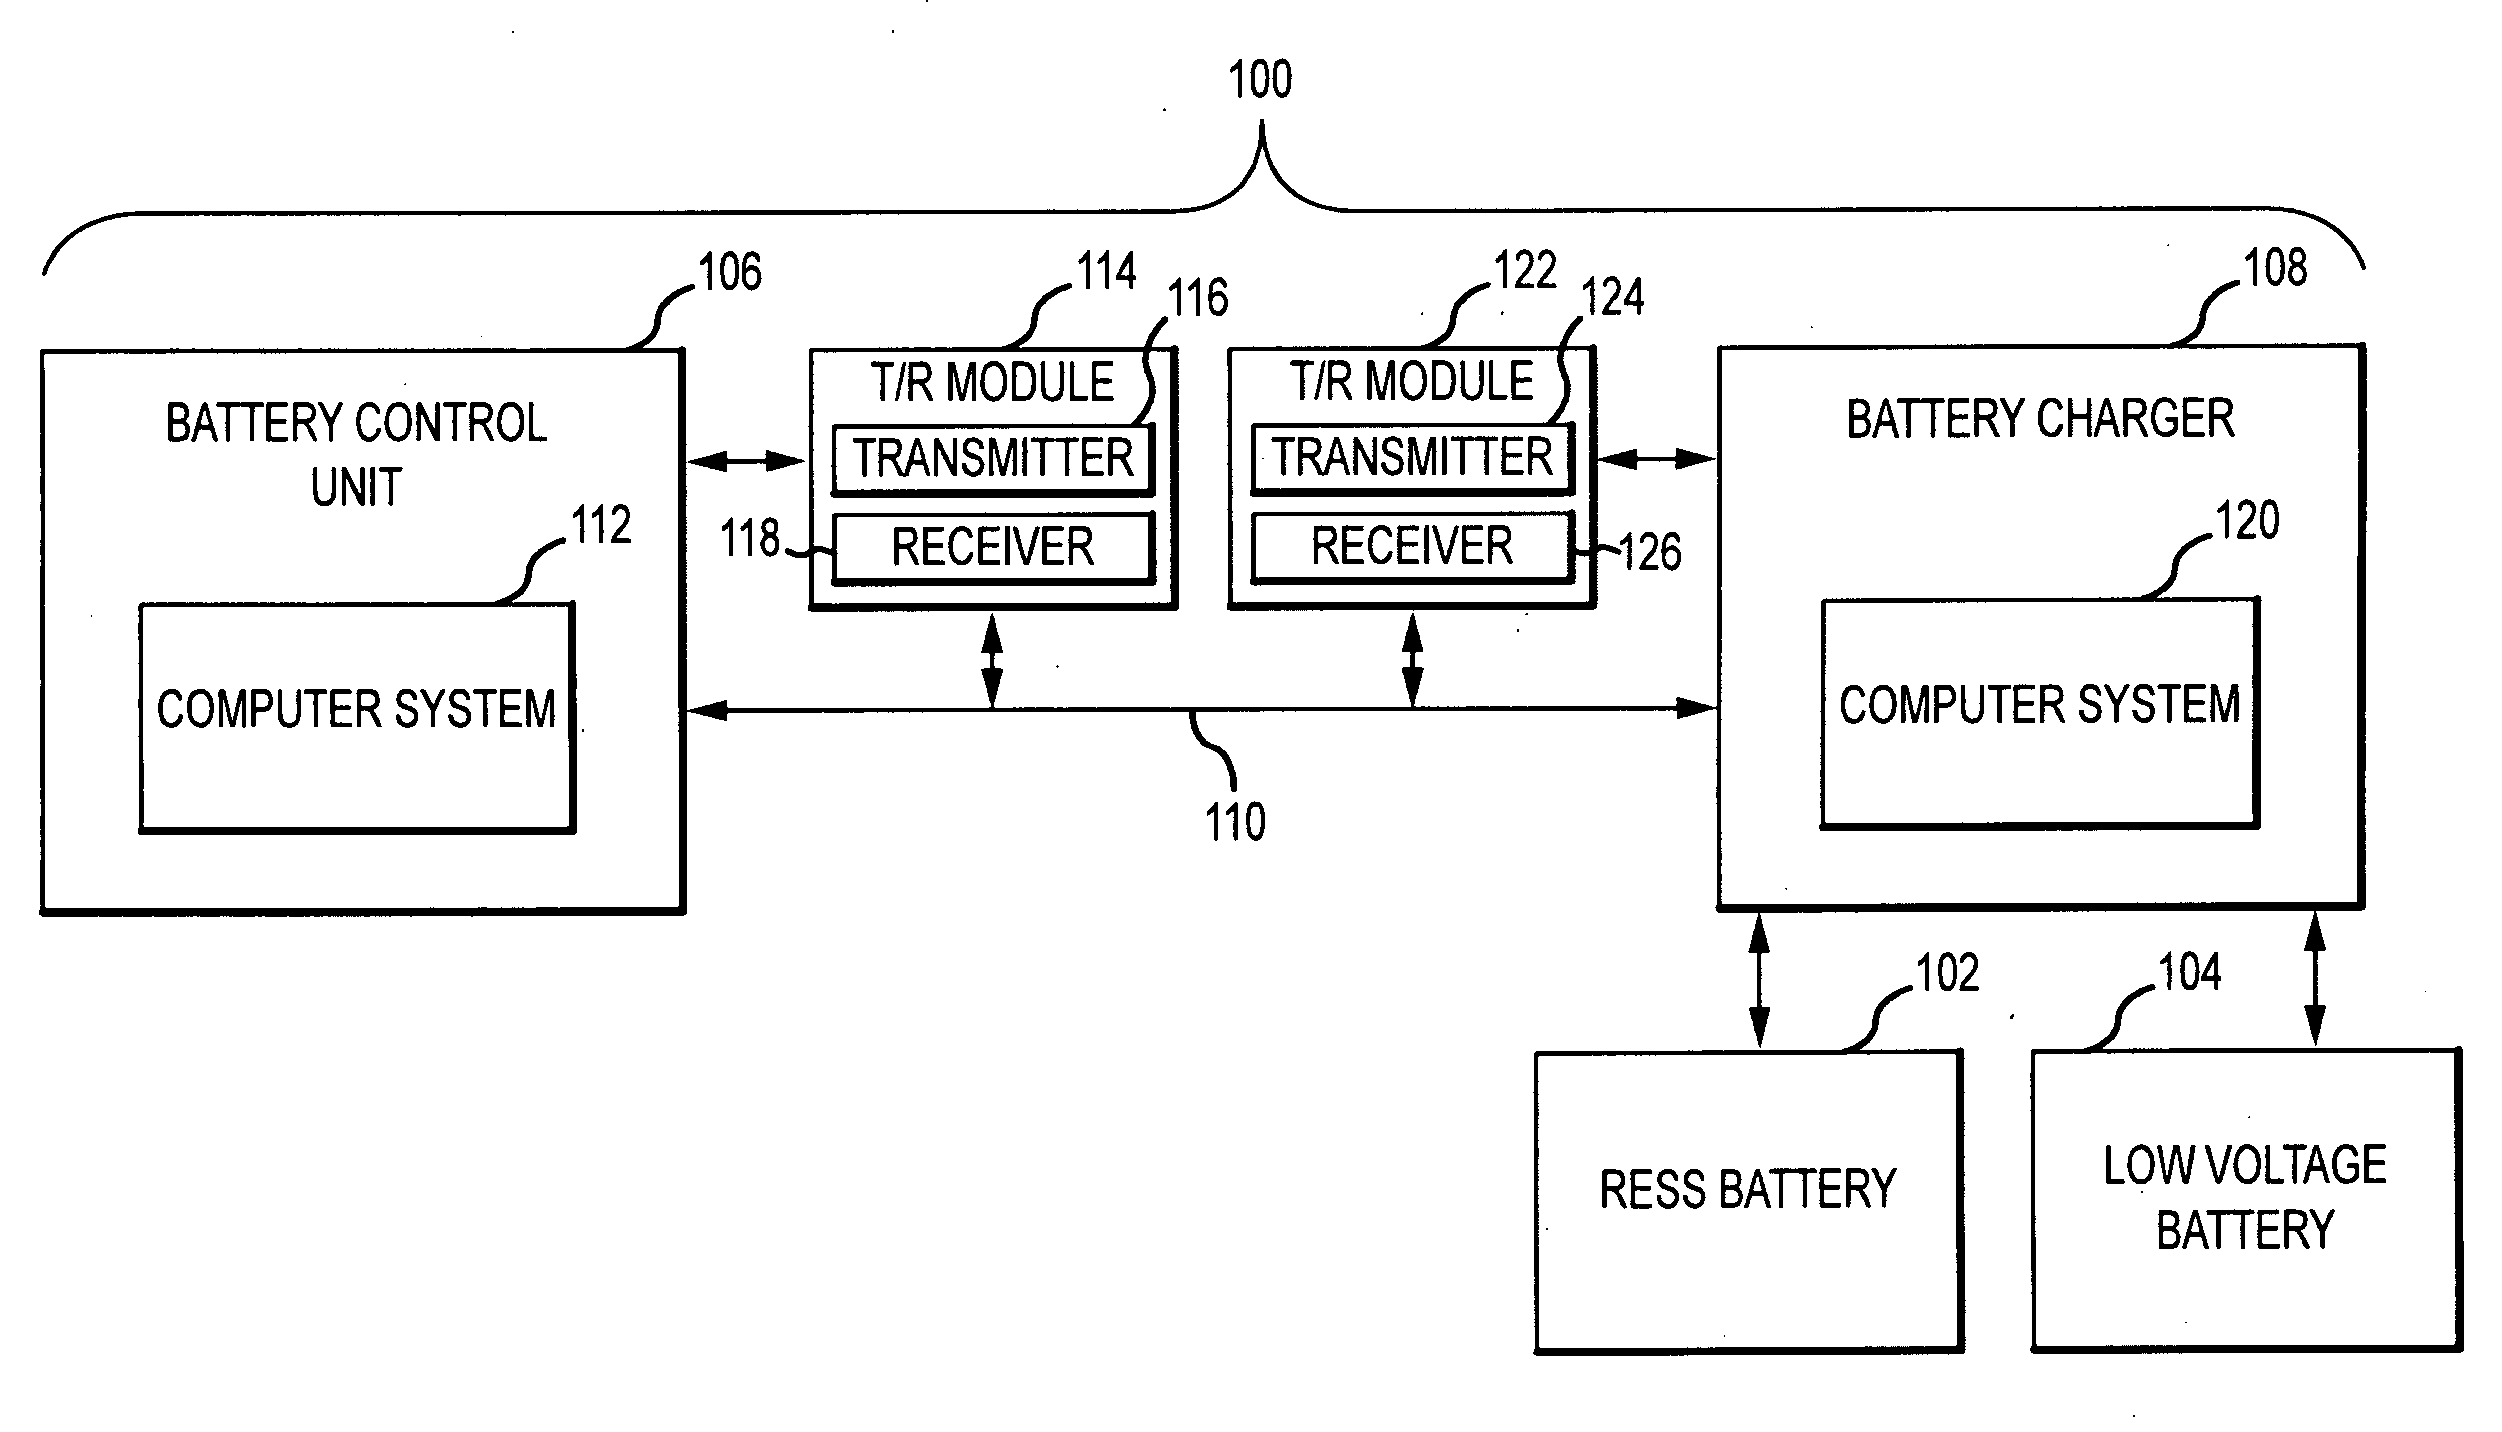 Methods and systems for providing communications between a battery charger and a battery control unit for a hybrid vehicle